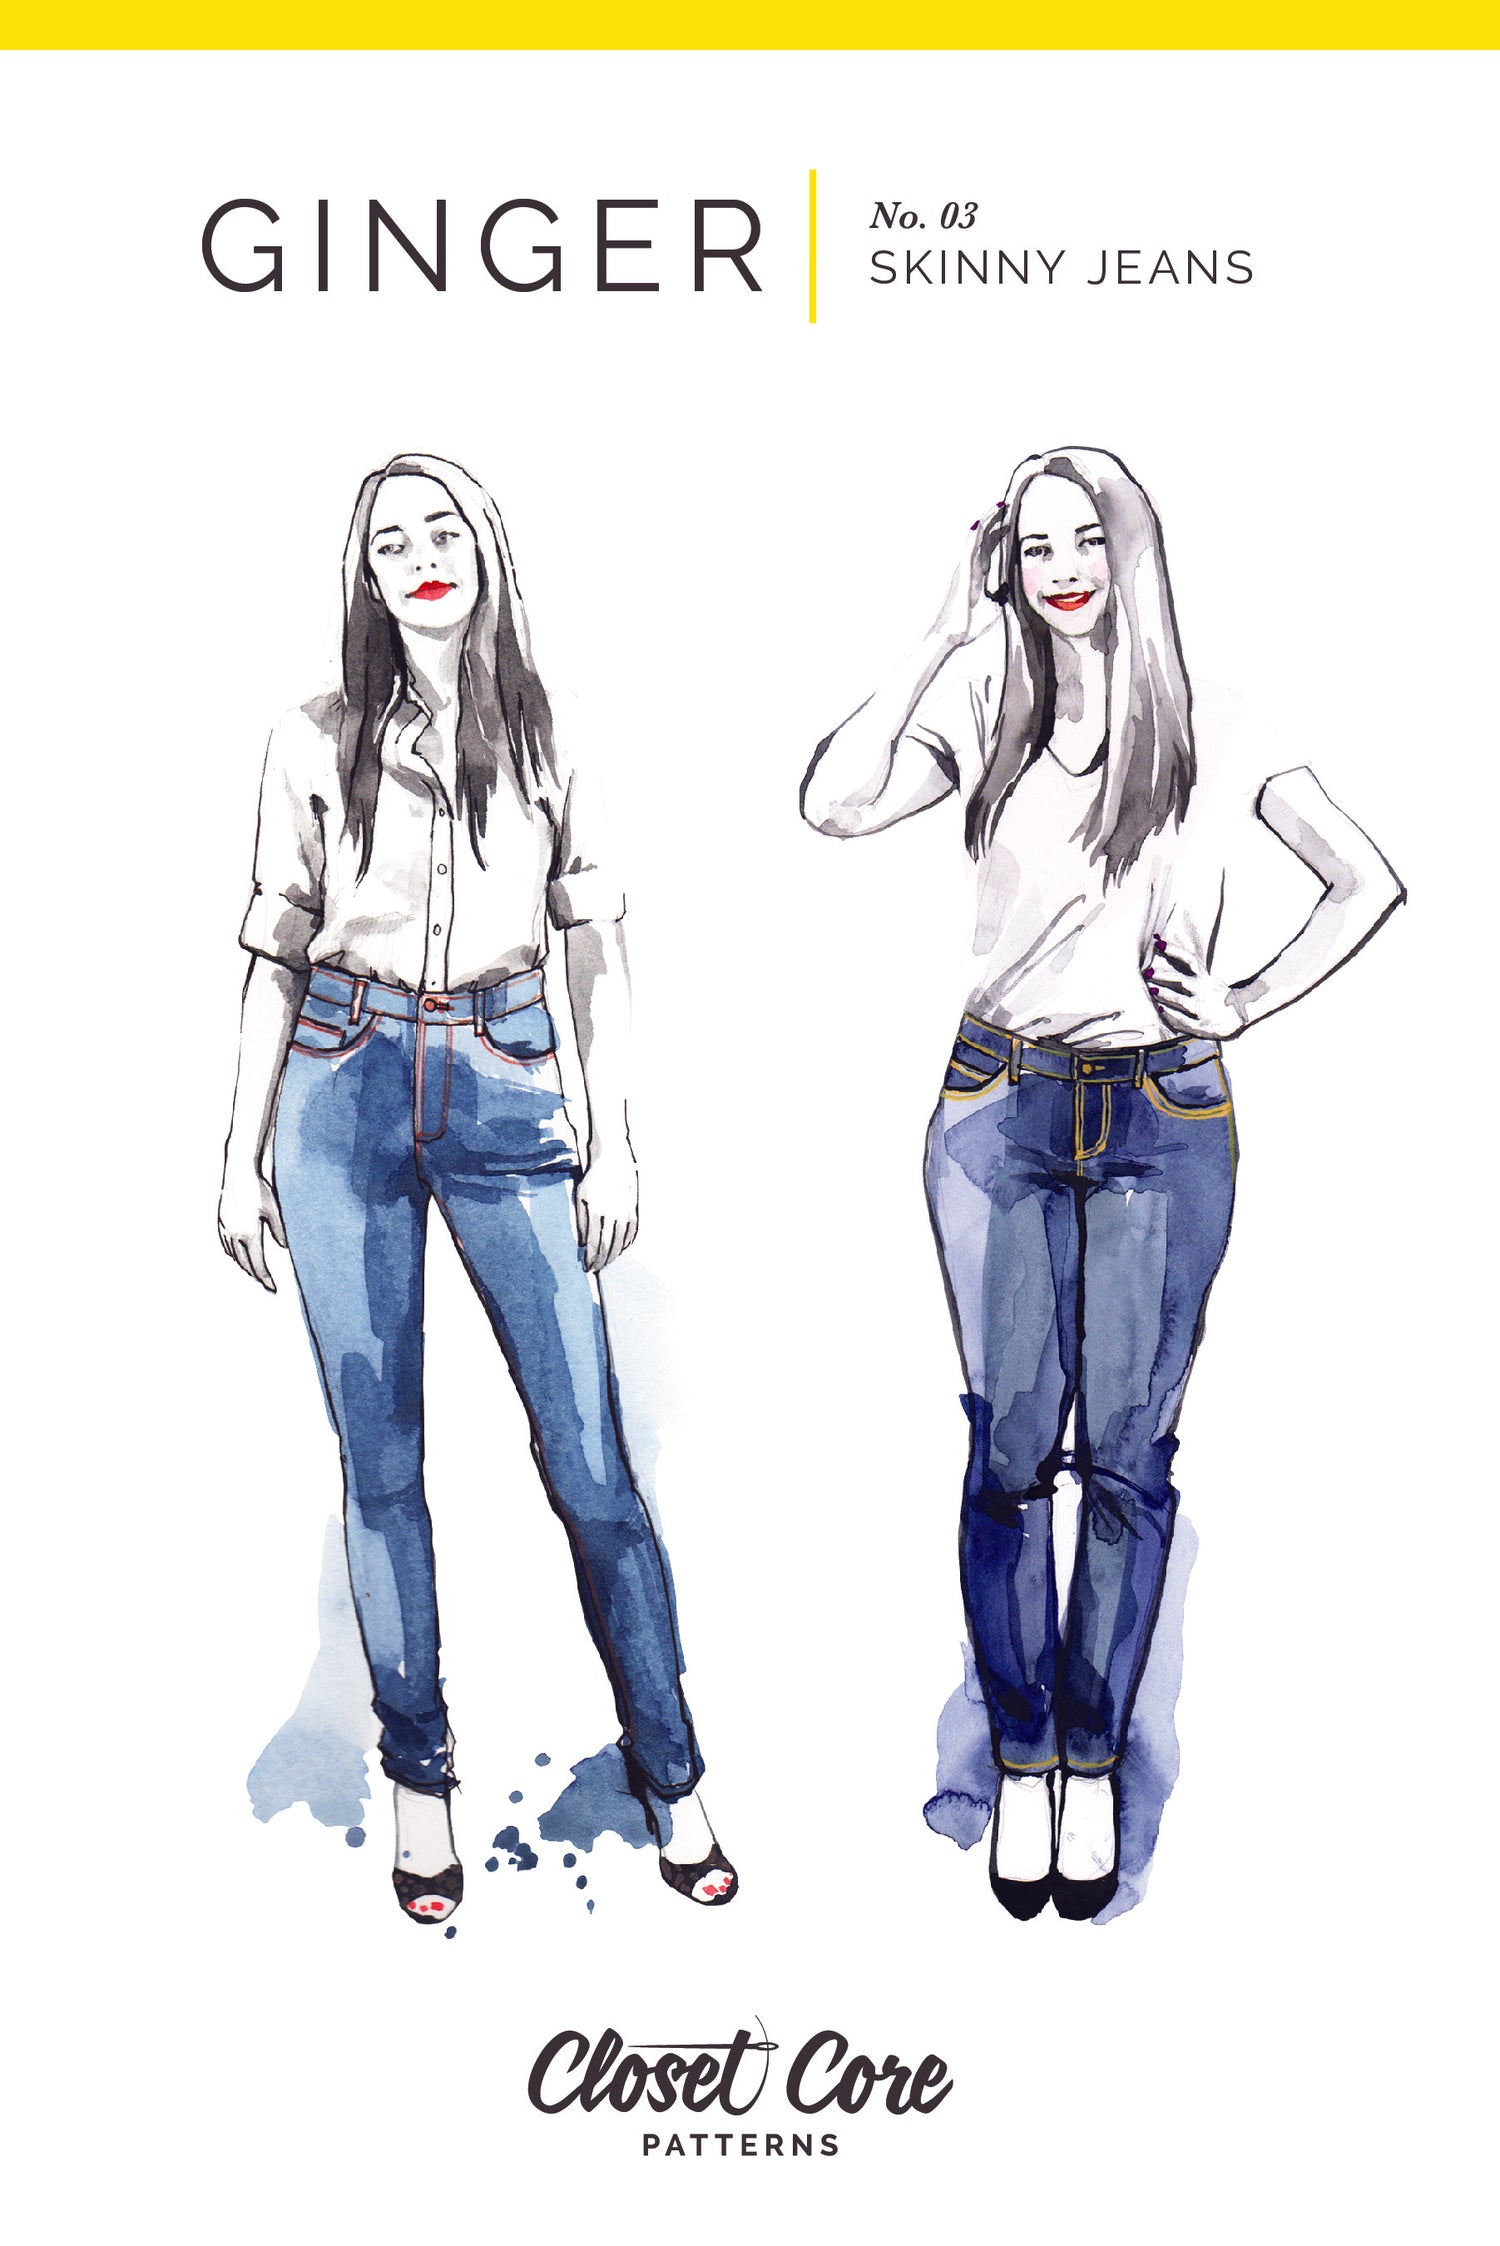 Ginger Skinny Jeans sewing pattern by closet core patterns